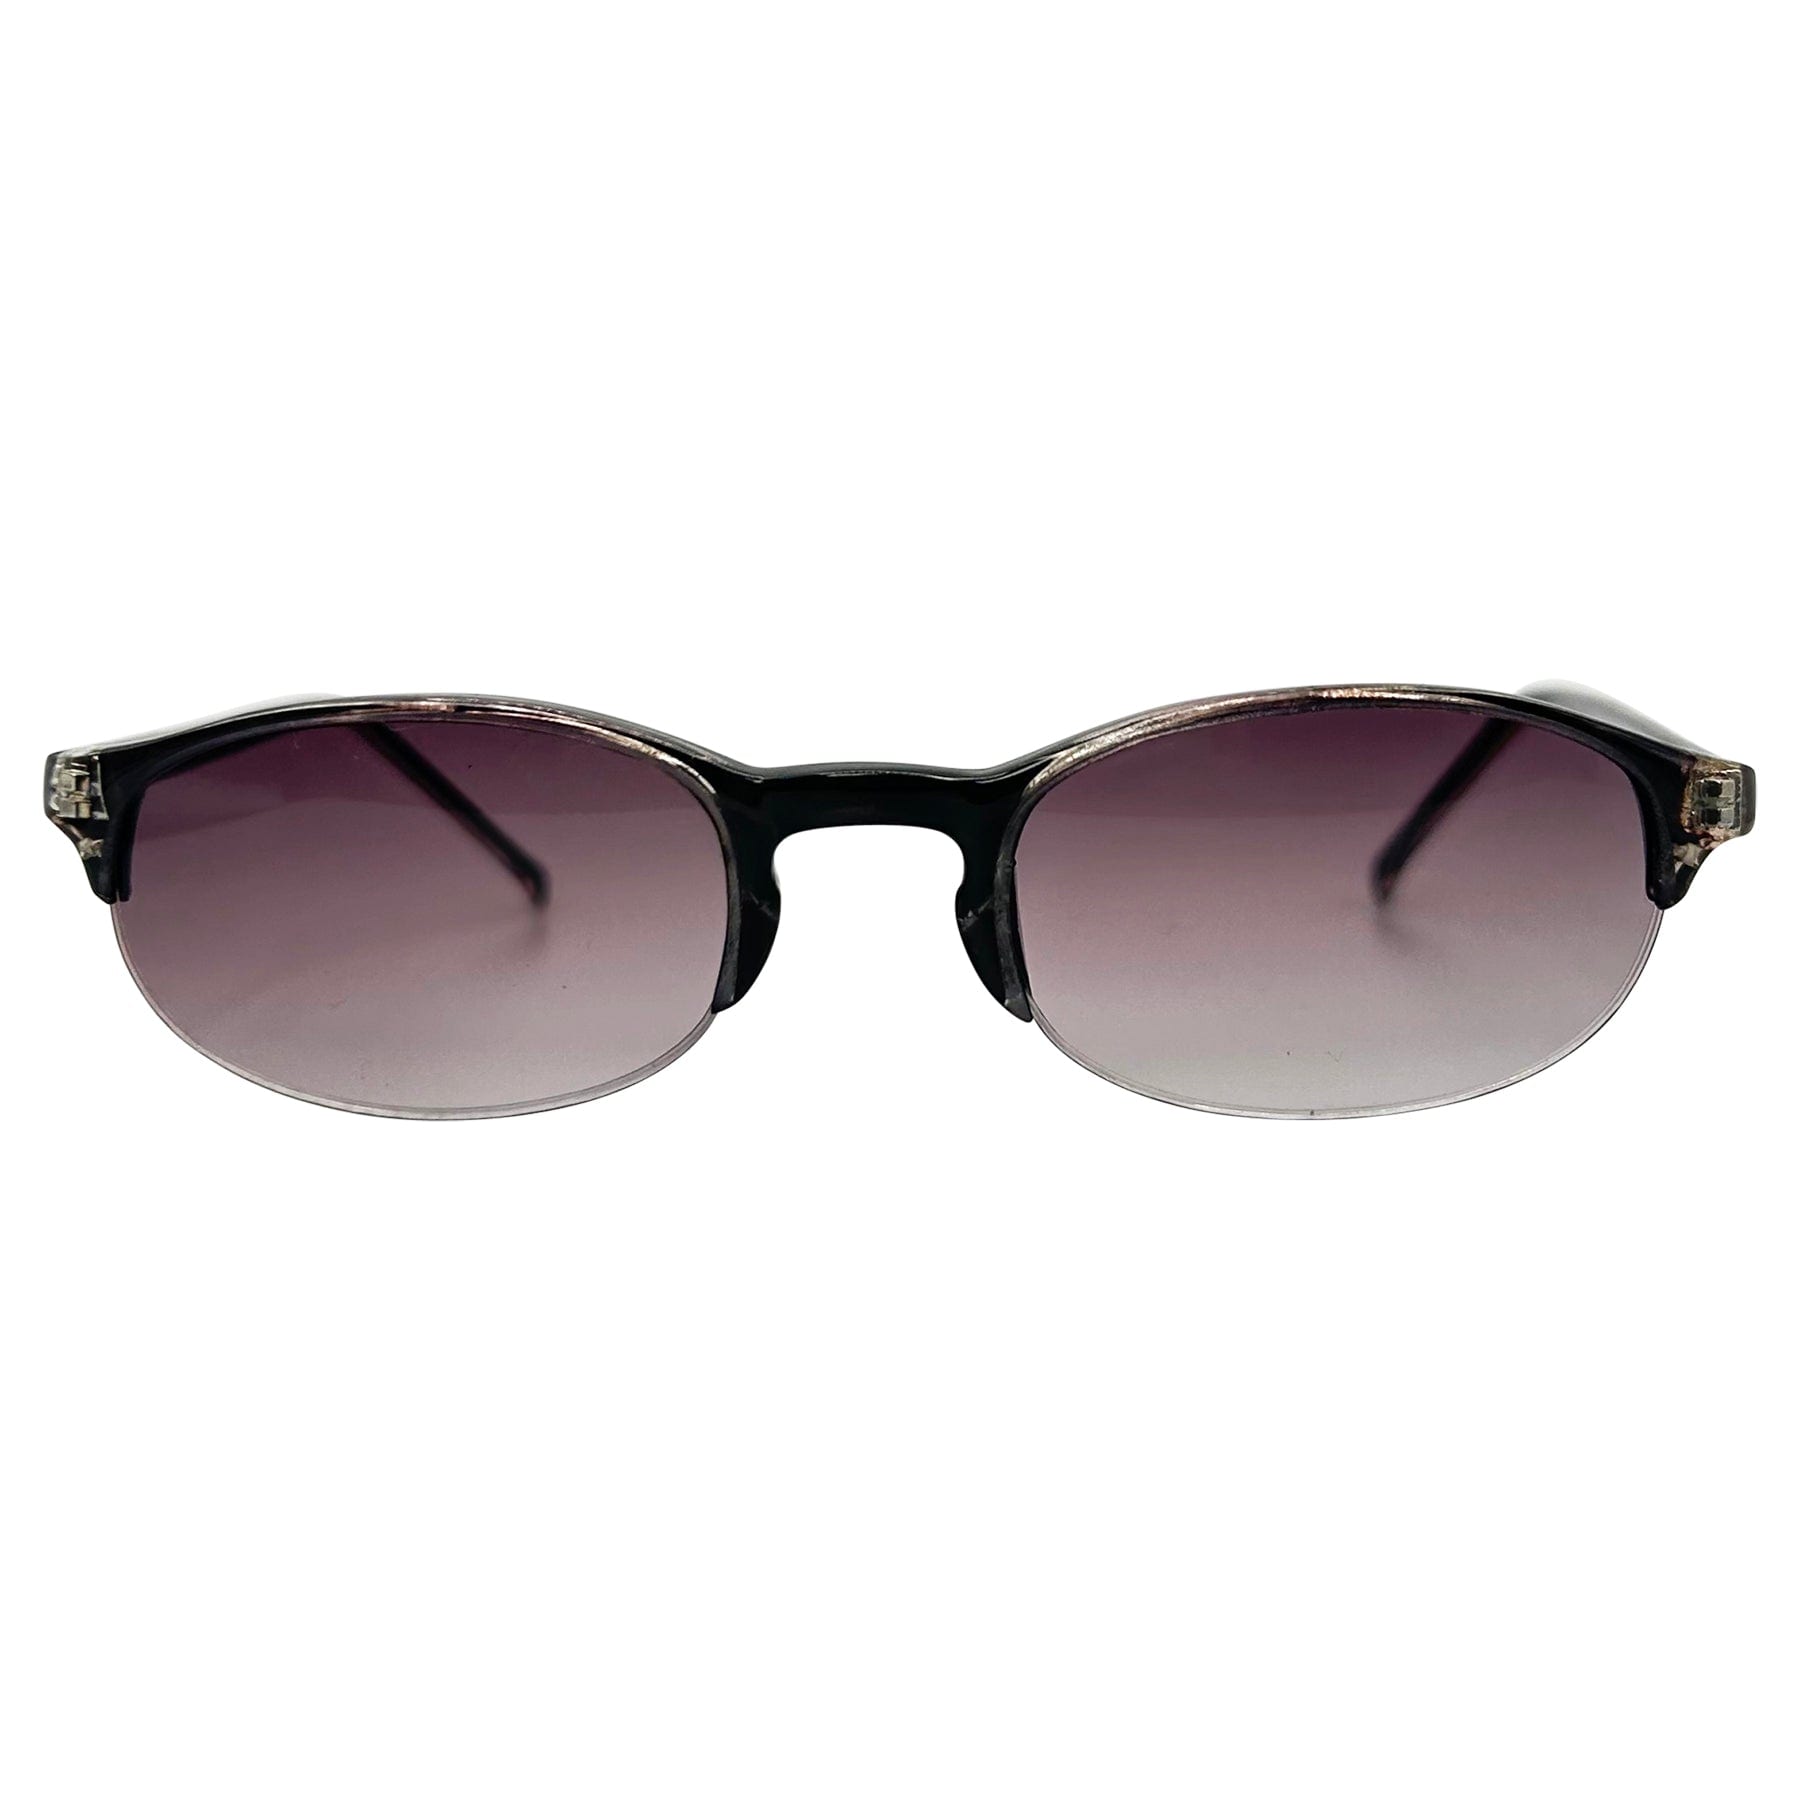 unisex and men's black sunglasses with a smoke lens and smokey frame detailing